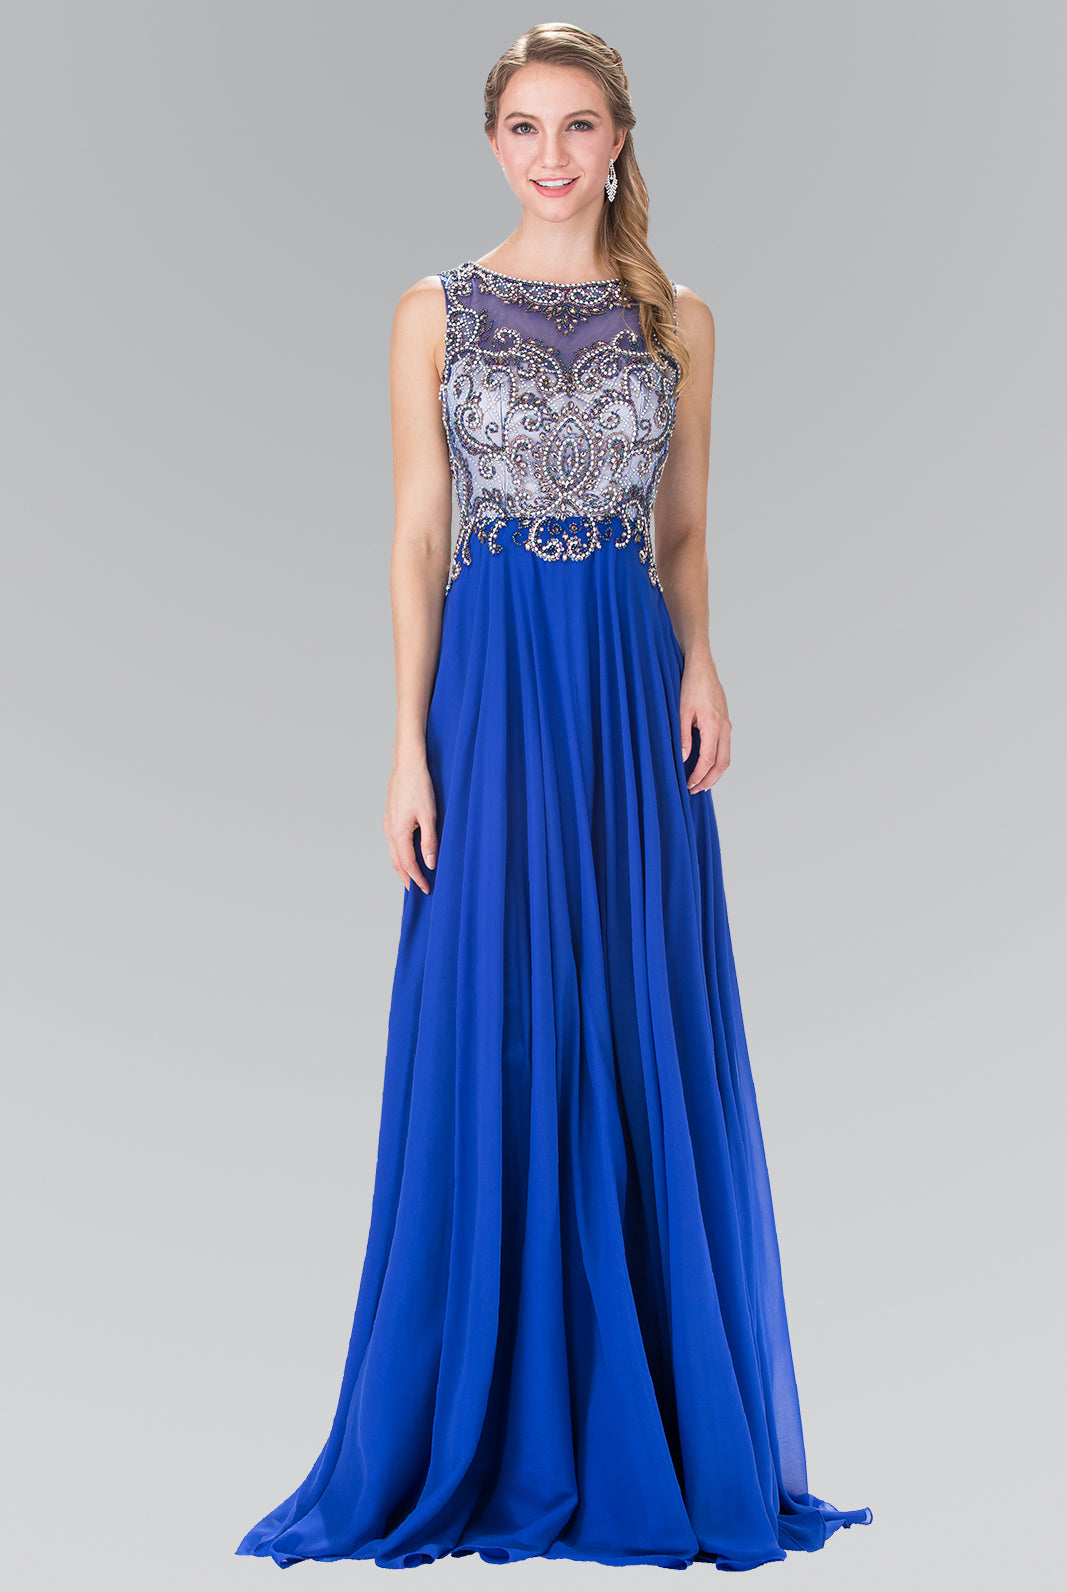 Beaded Top Chiffon Long Dress with Open Back-smcdress